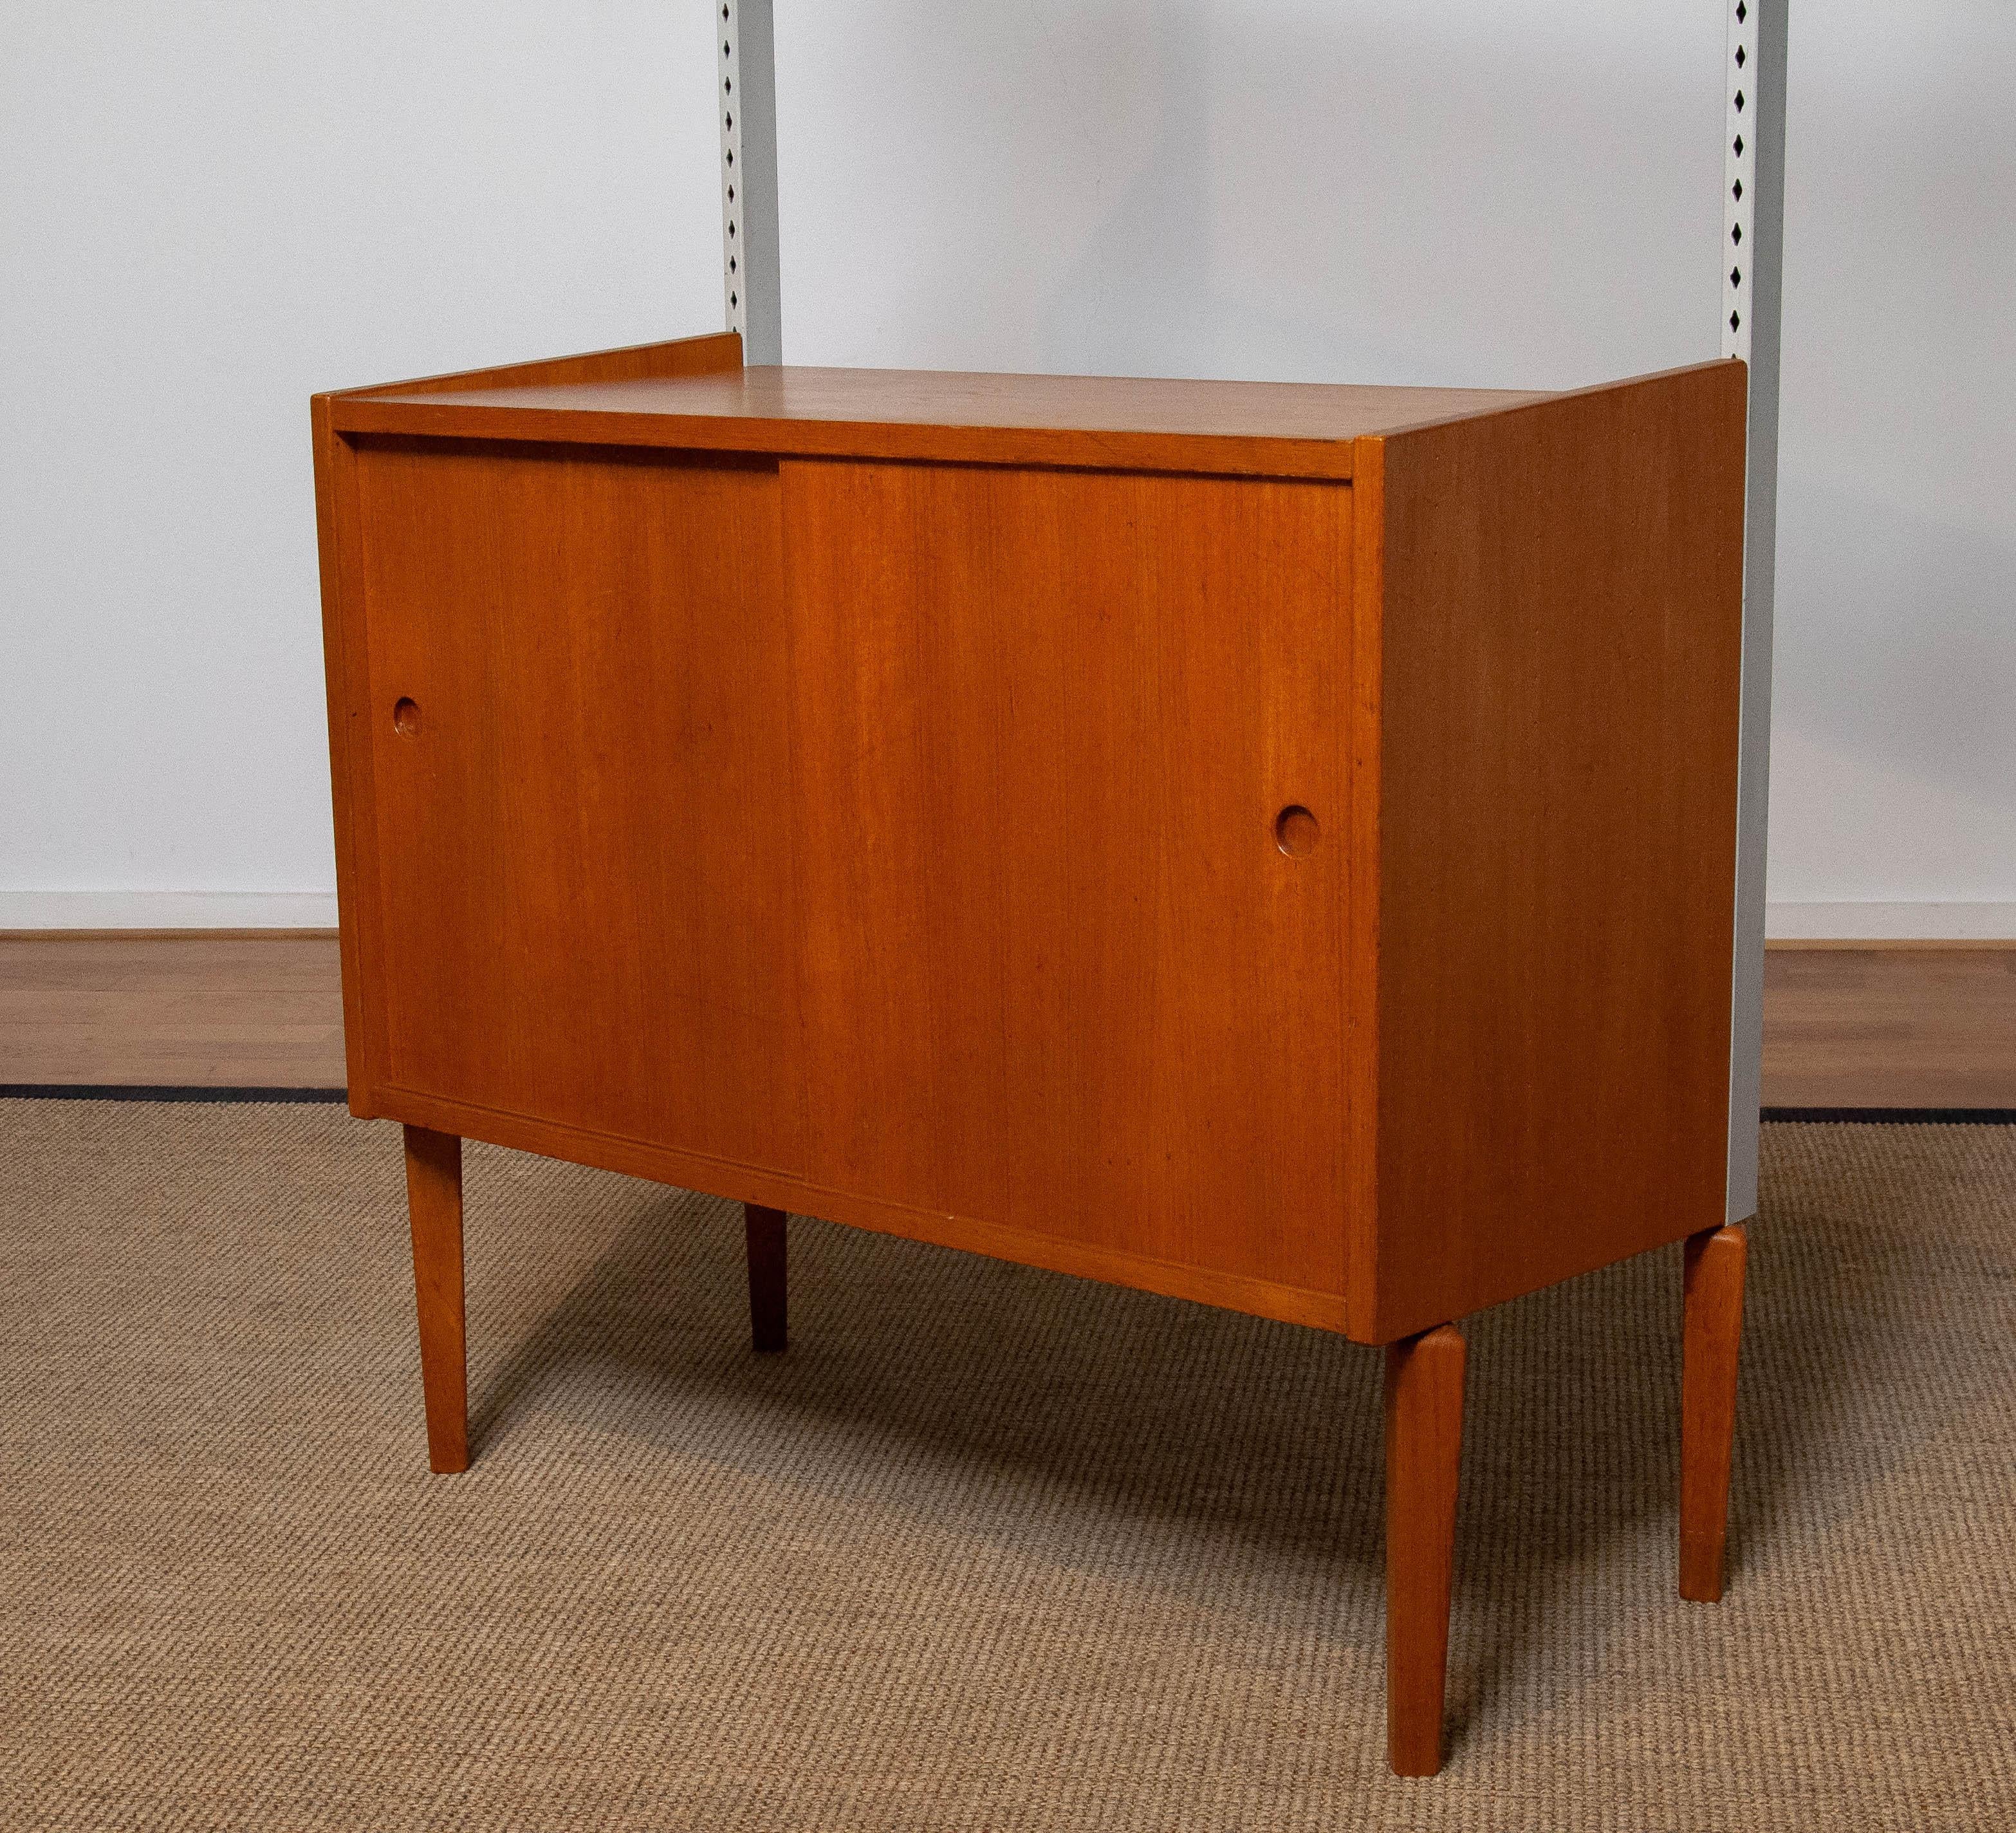 Swedish 1950's Teak Shelf System / Bookcase in Teak with Steel Bars by Harald Lundqvist For Sale